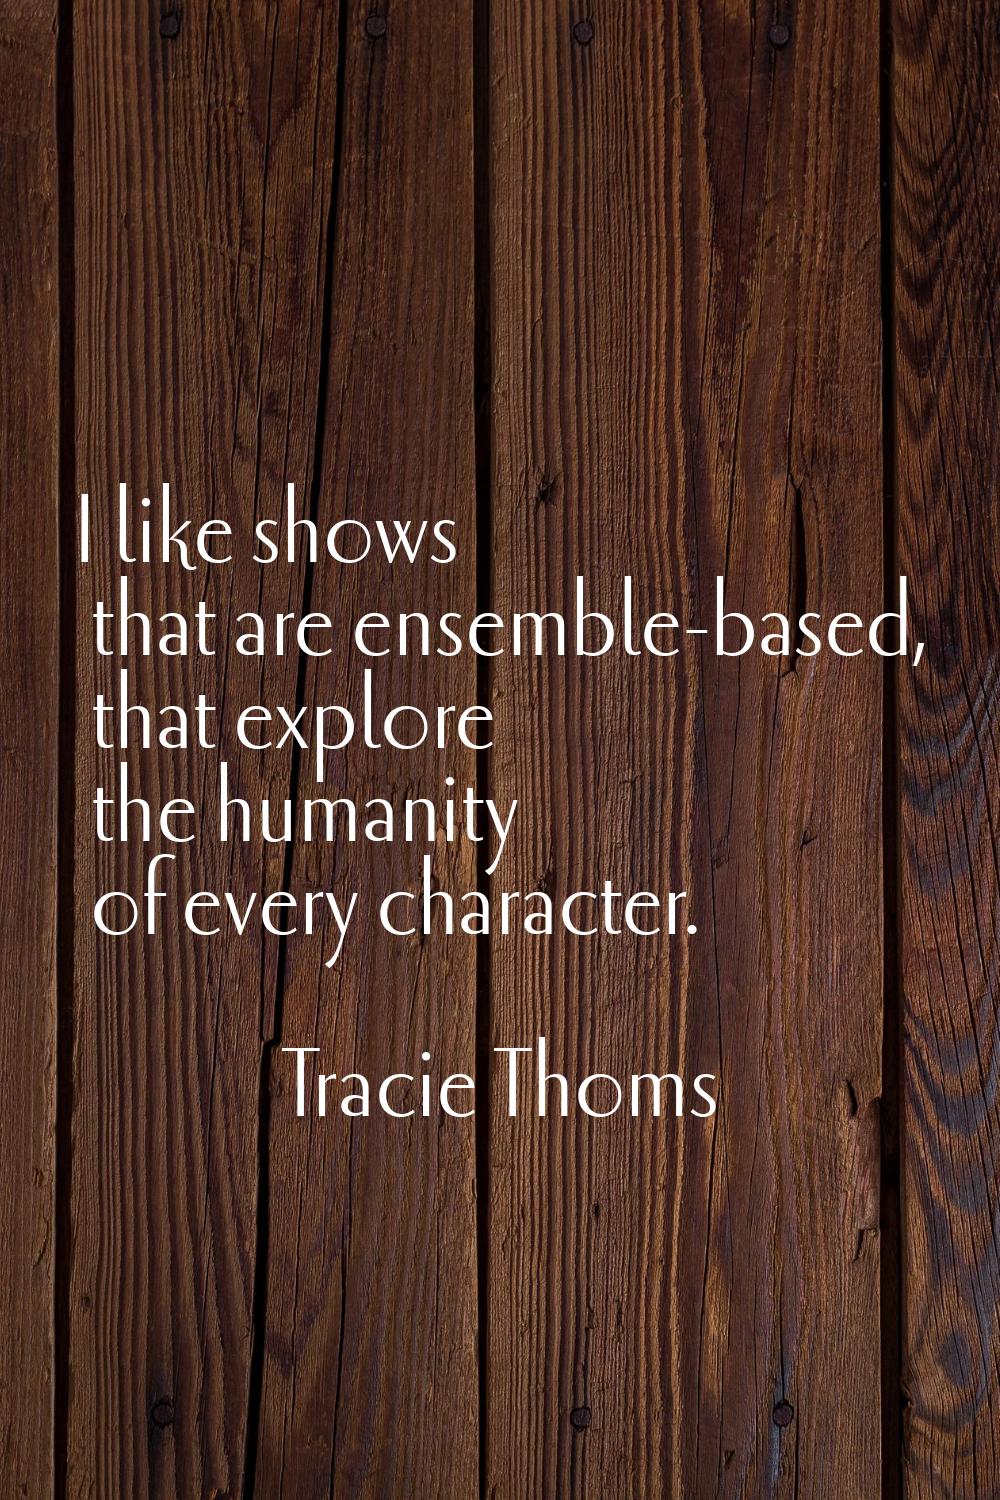 I like shows that are ensemble-based, that explore the humanity of every character.